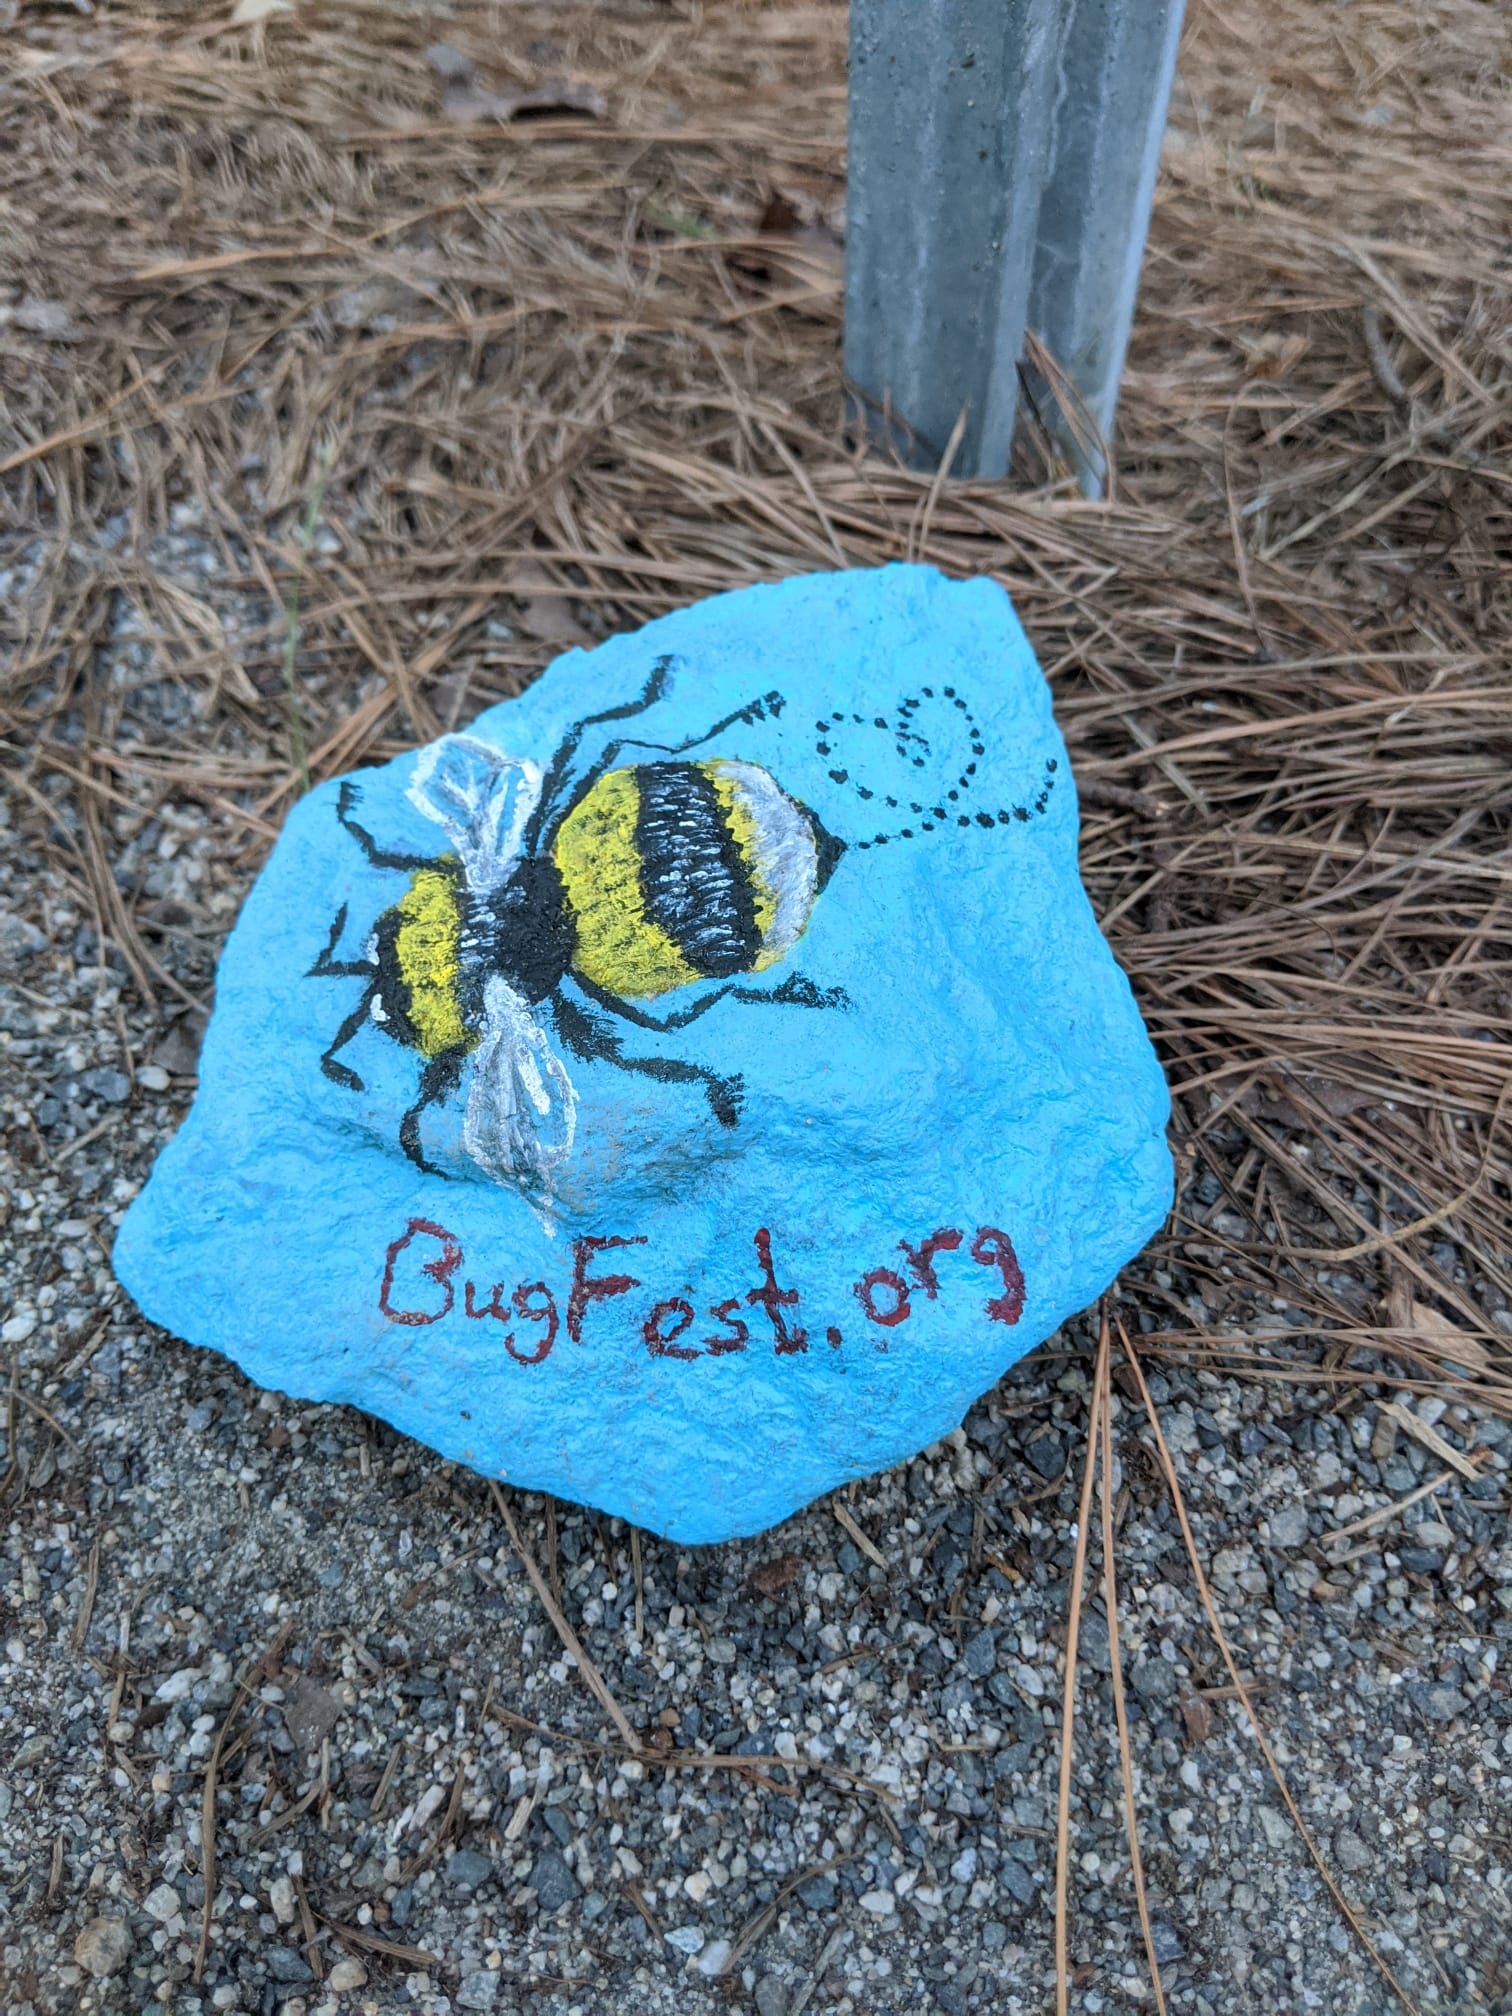 A bee painted on a rock with a blue background